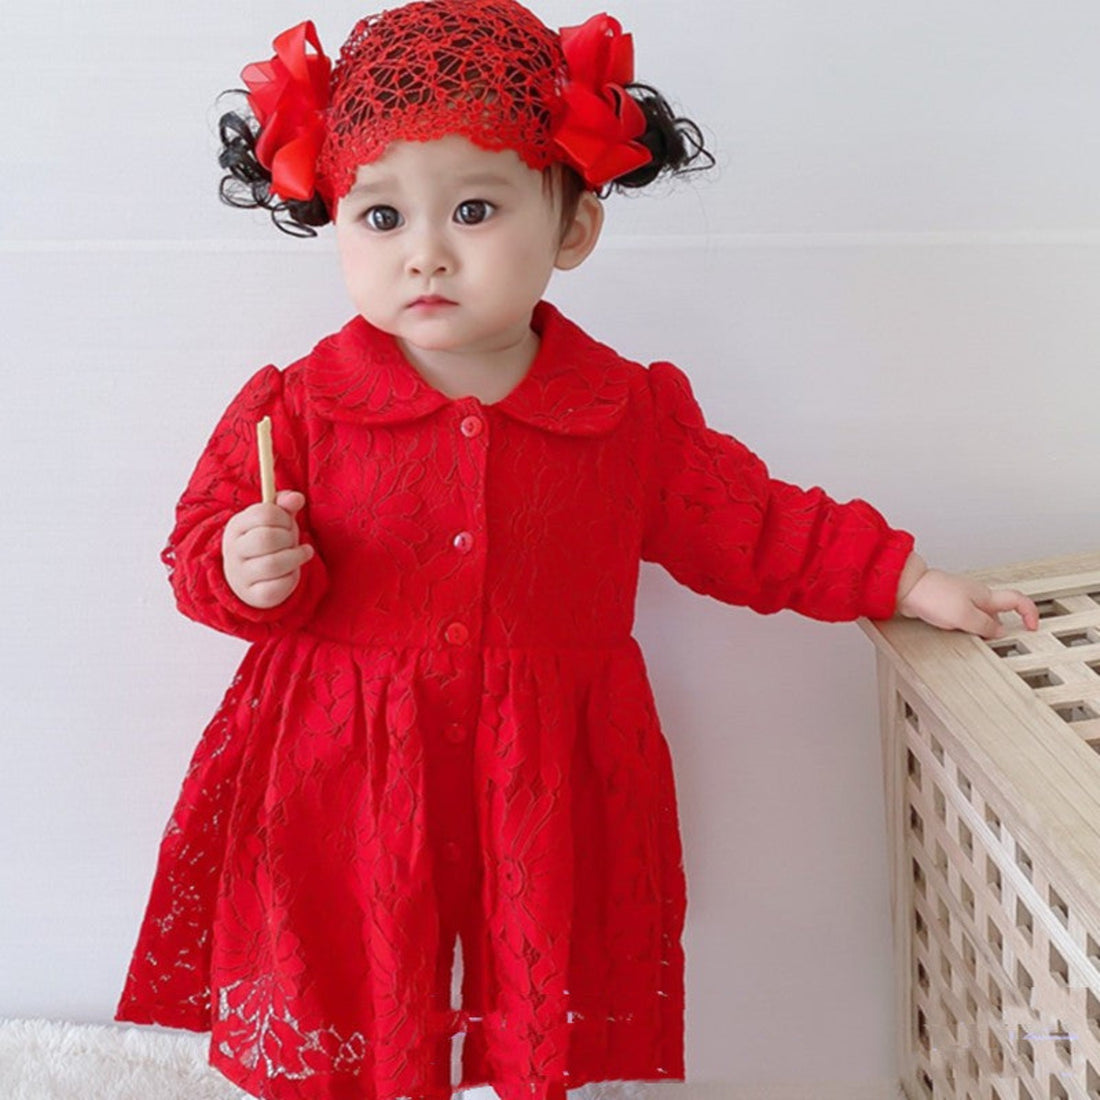 Newborn girl in a red dress, perfect for full moon parties and celebrations.